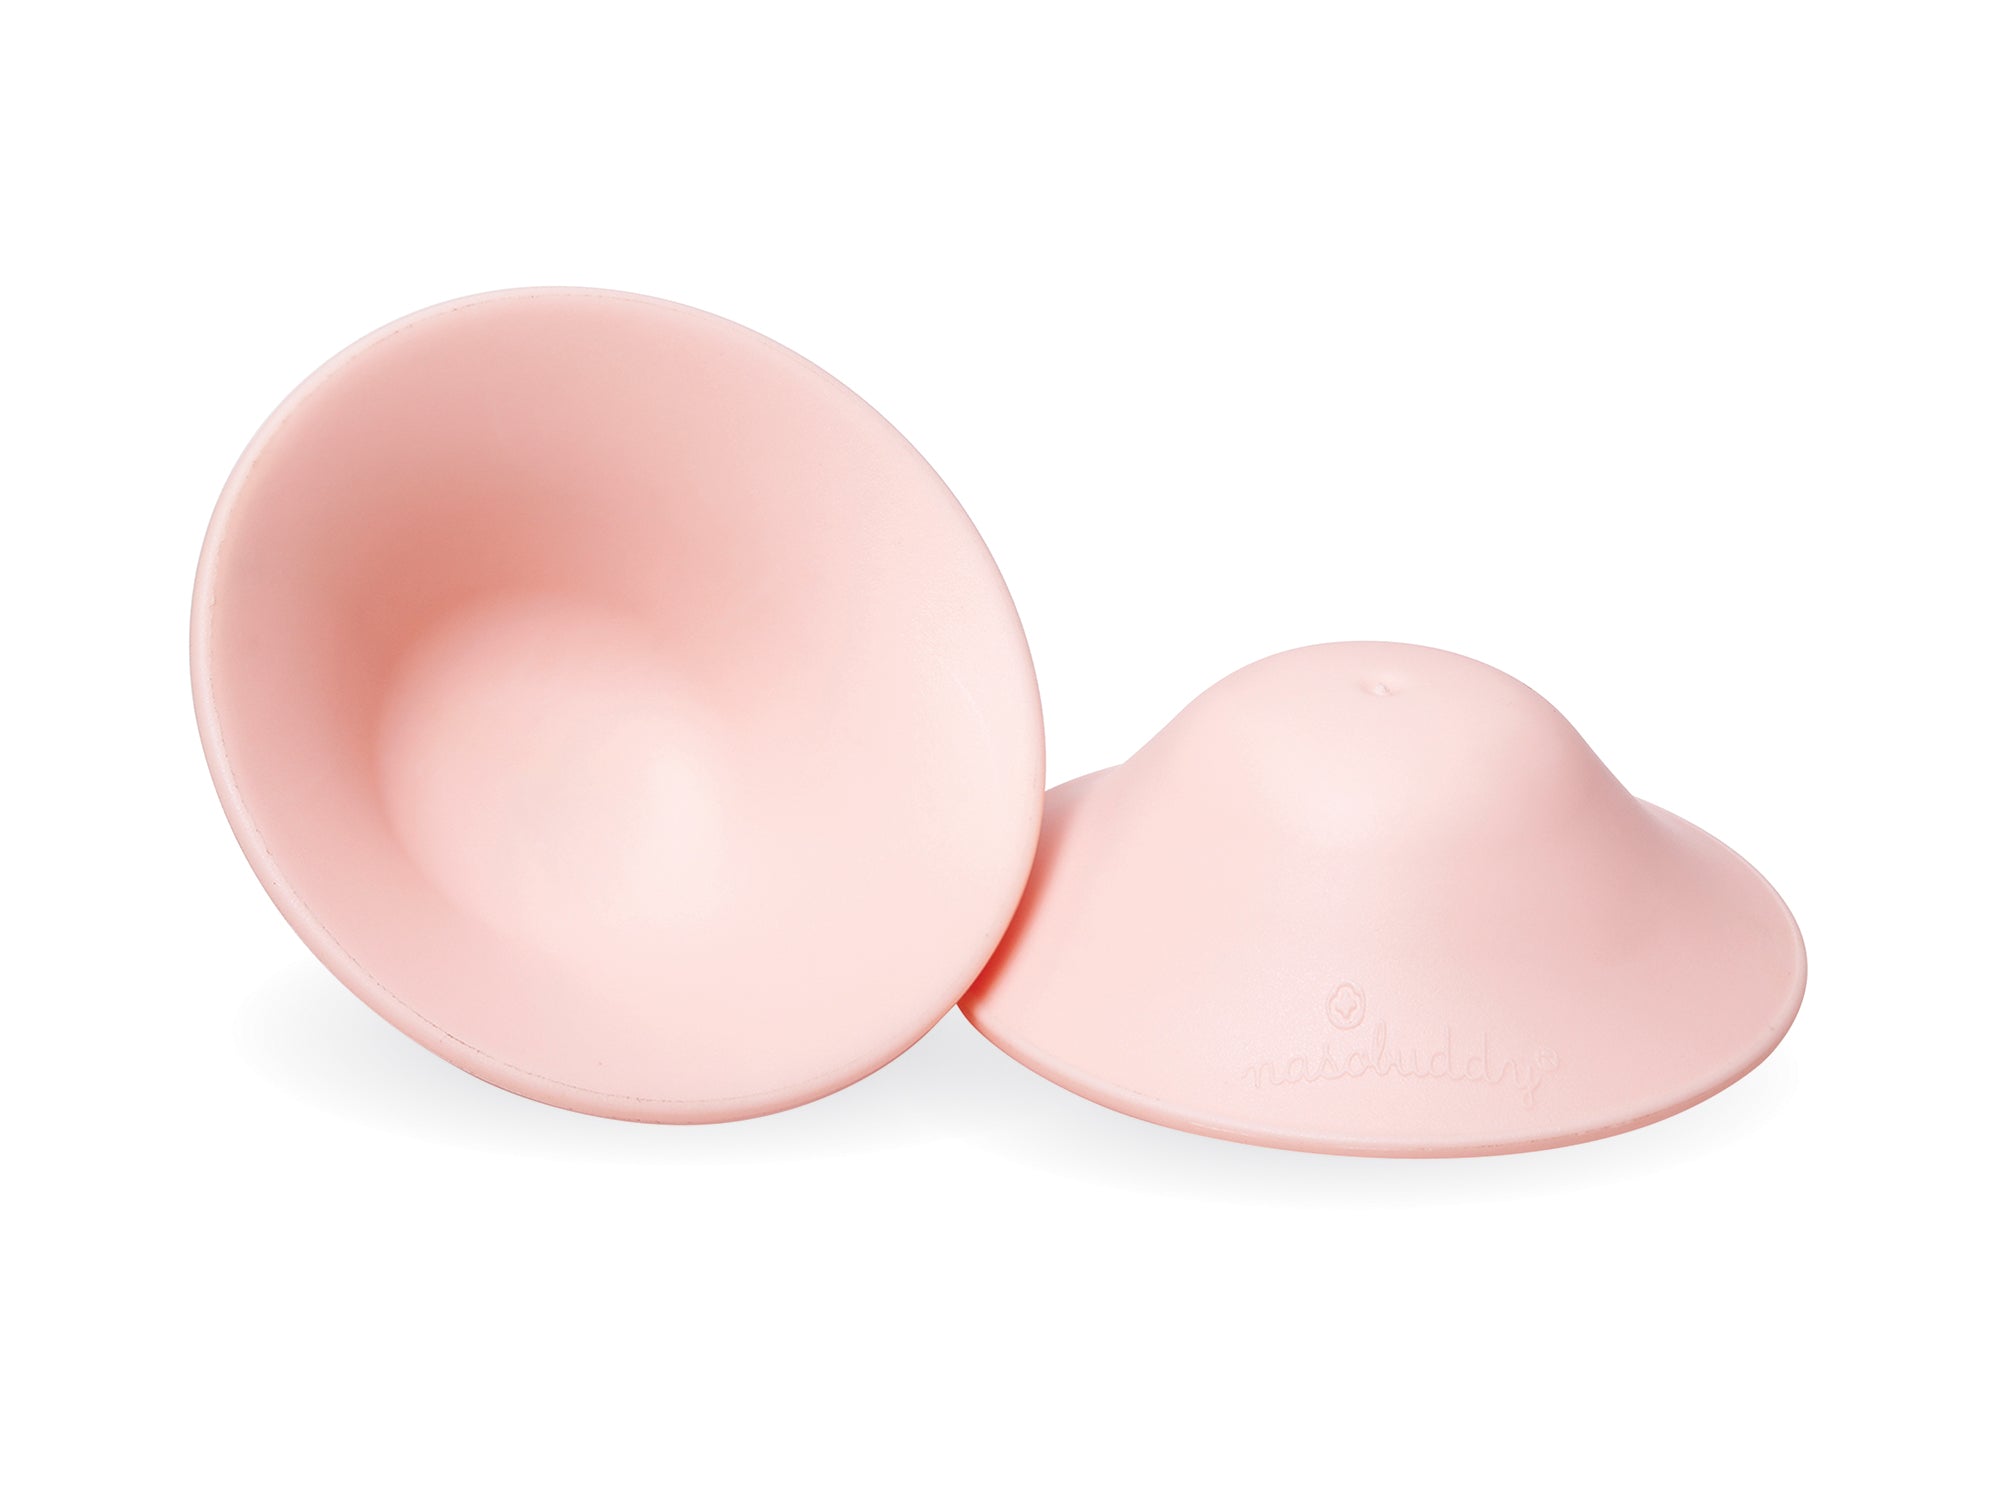 Frequently Asked Questions for Nipple Covers